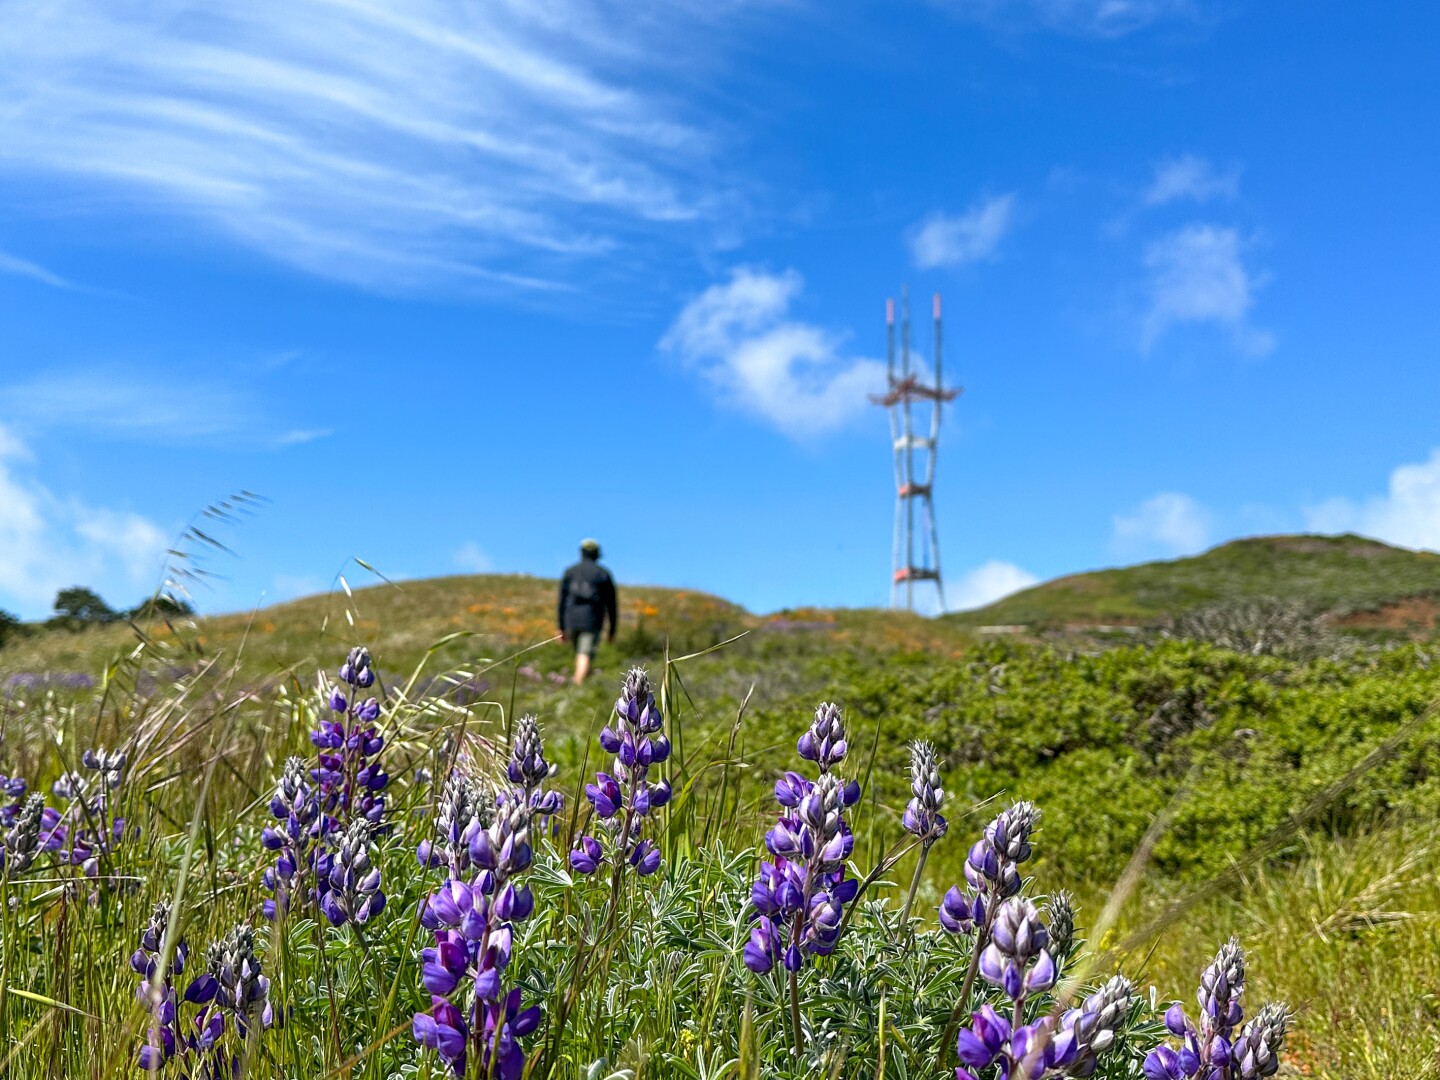 <a>In the spring, Twin Peaks is full of color thanks to blooming poppies and lupines.</a>